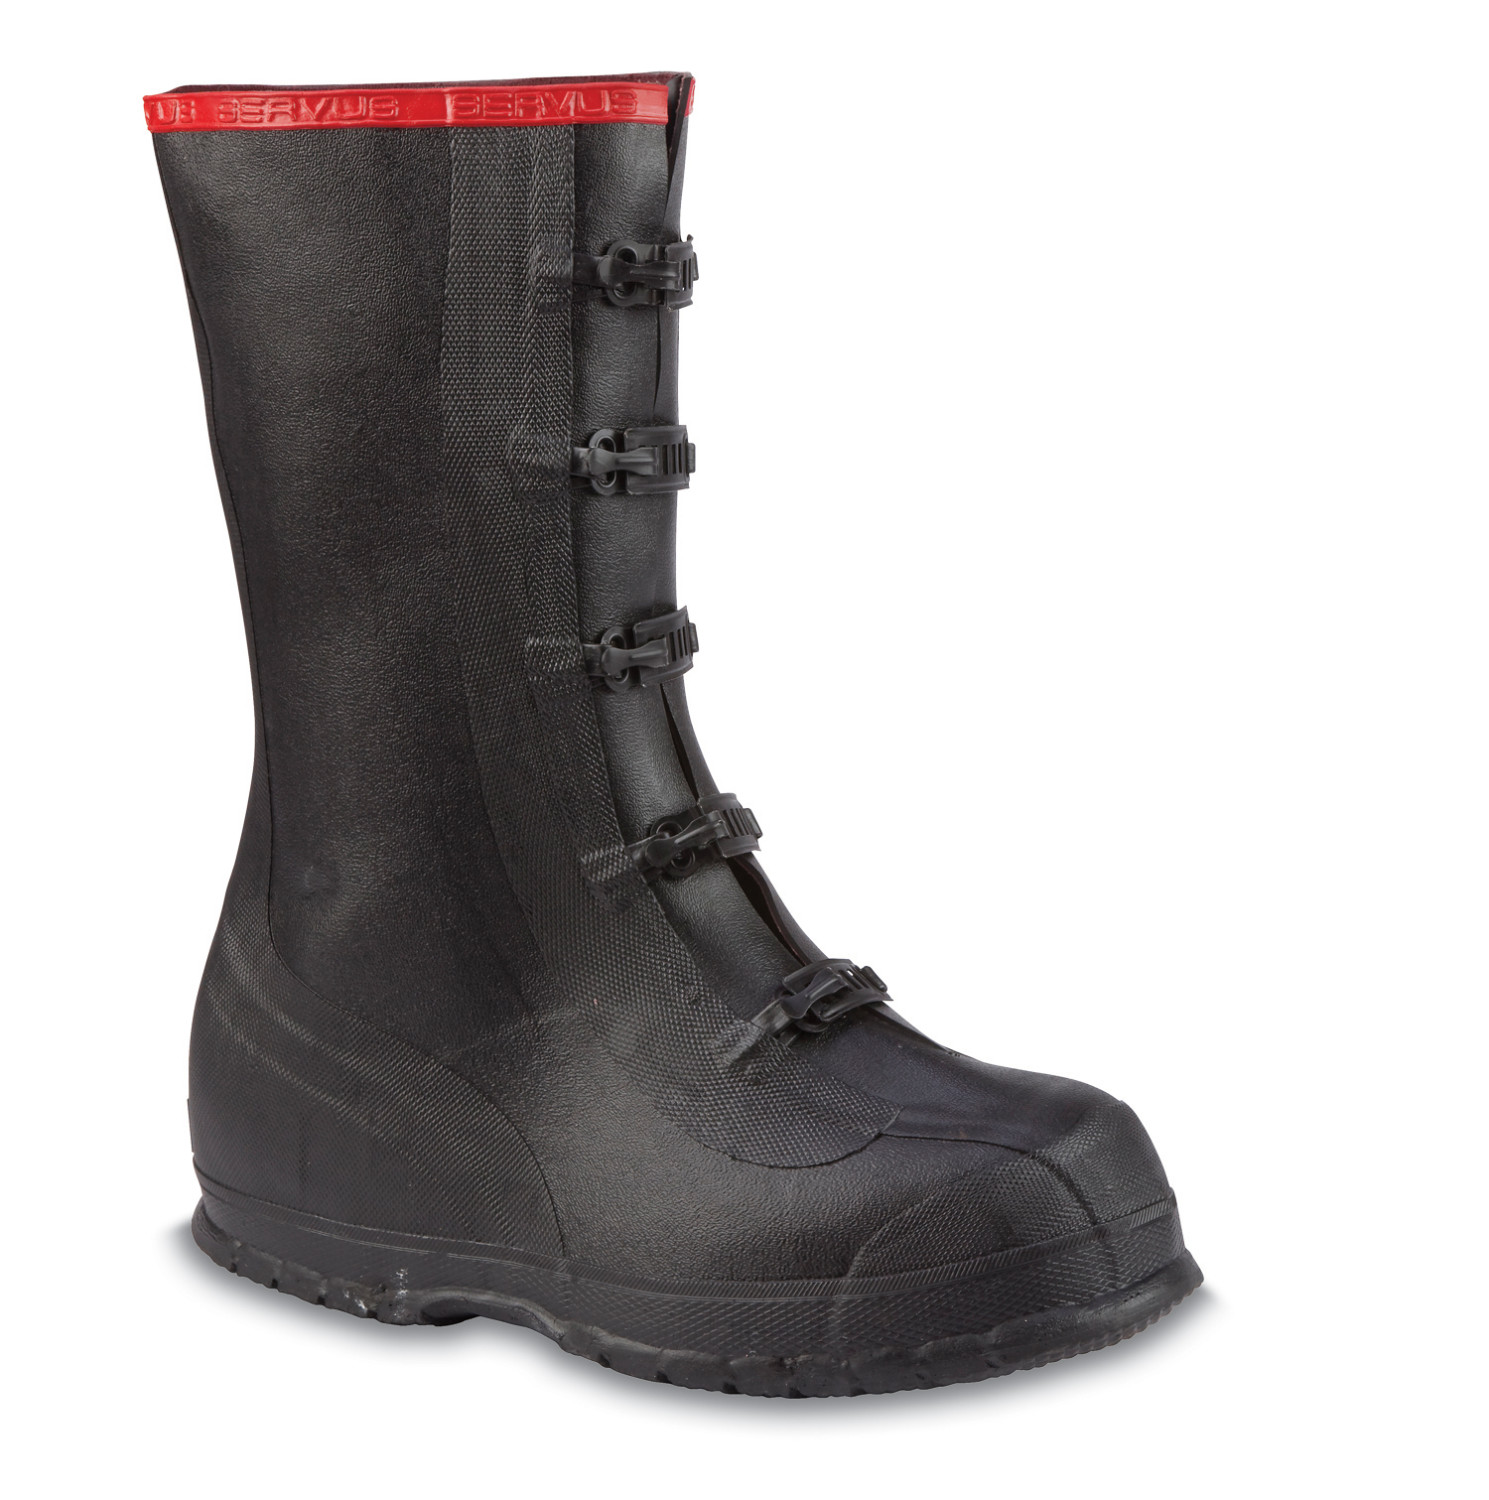 Ranger 15 in Rubber Overshoe Boot Size 11(M) - image 1 of 5